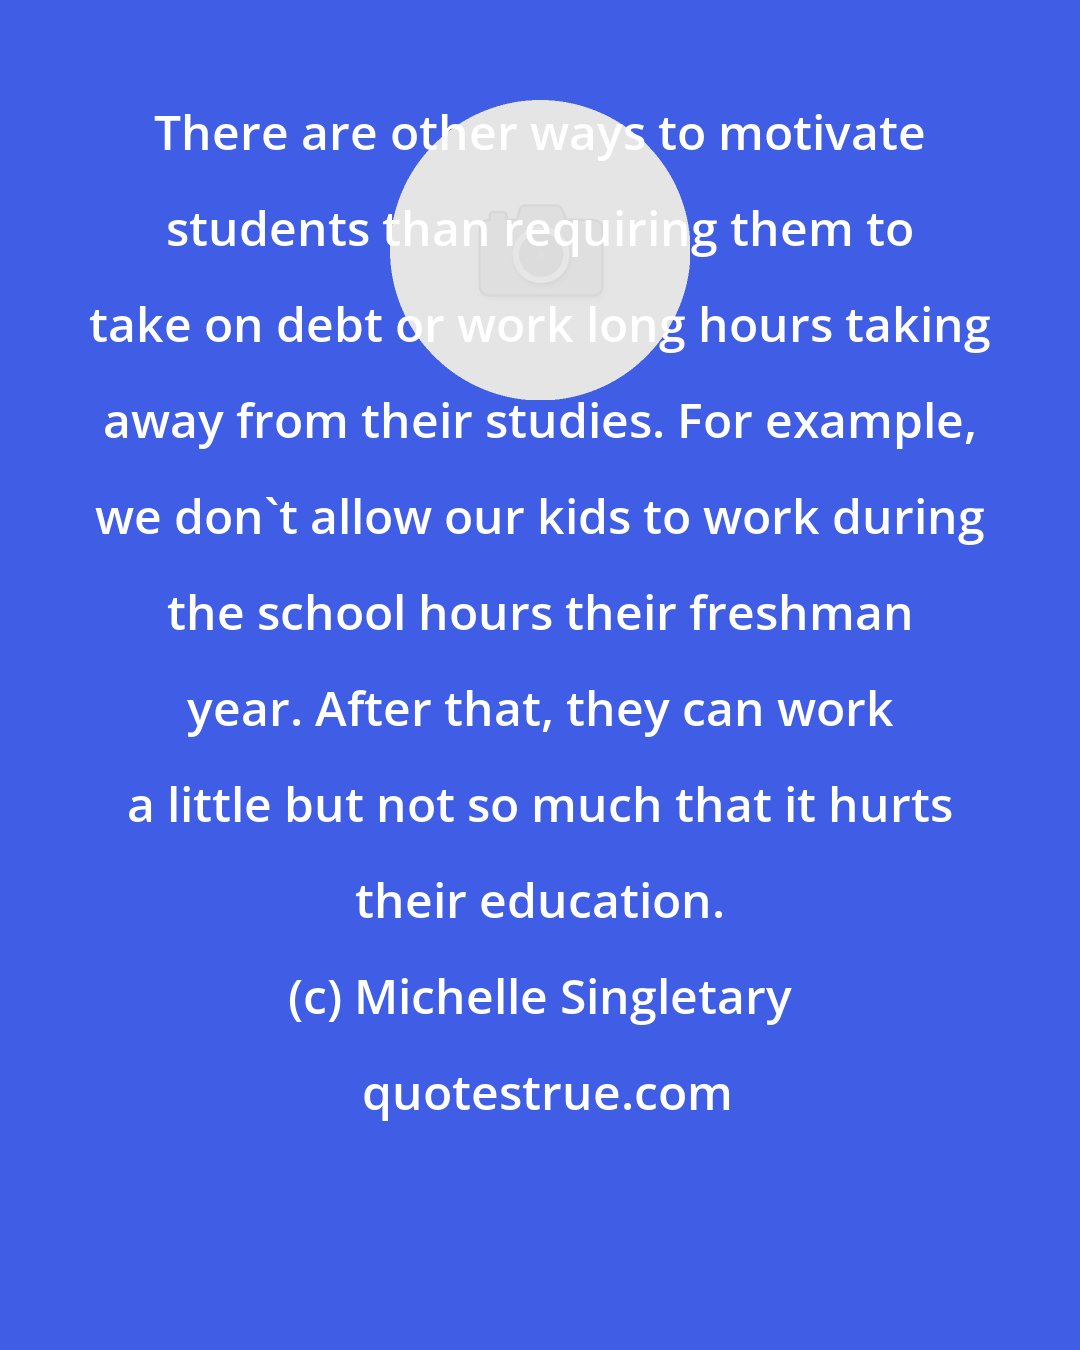 Michelle Singletary: There are other ways to motivate students than requiring them to take on debt or work long hours taking away from their studies. For example, we don't allow our kids to work during the school hours their freshman year. After that, they can work a little but not so much that it hurts their education.